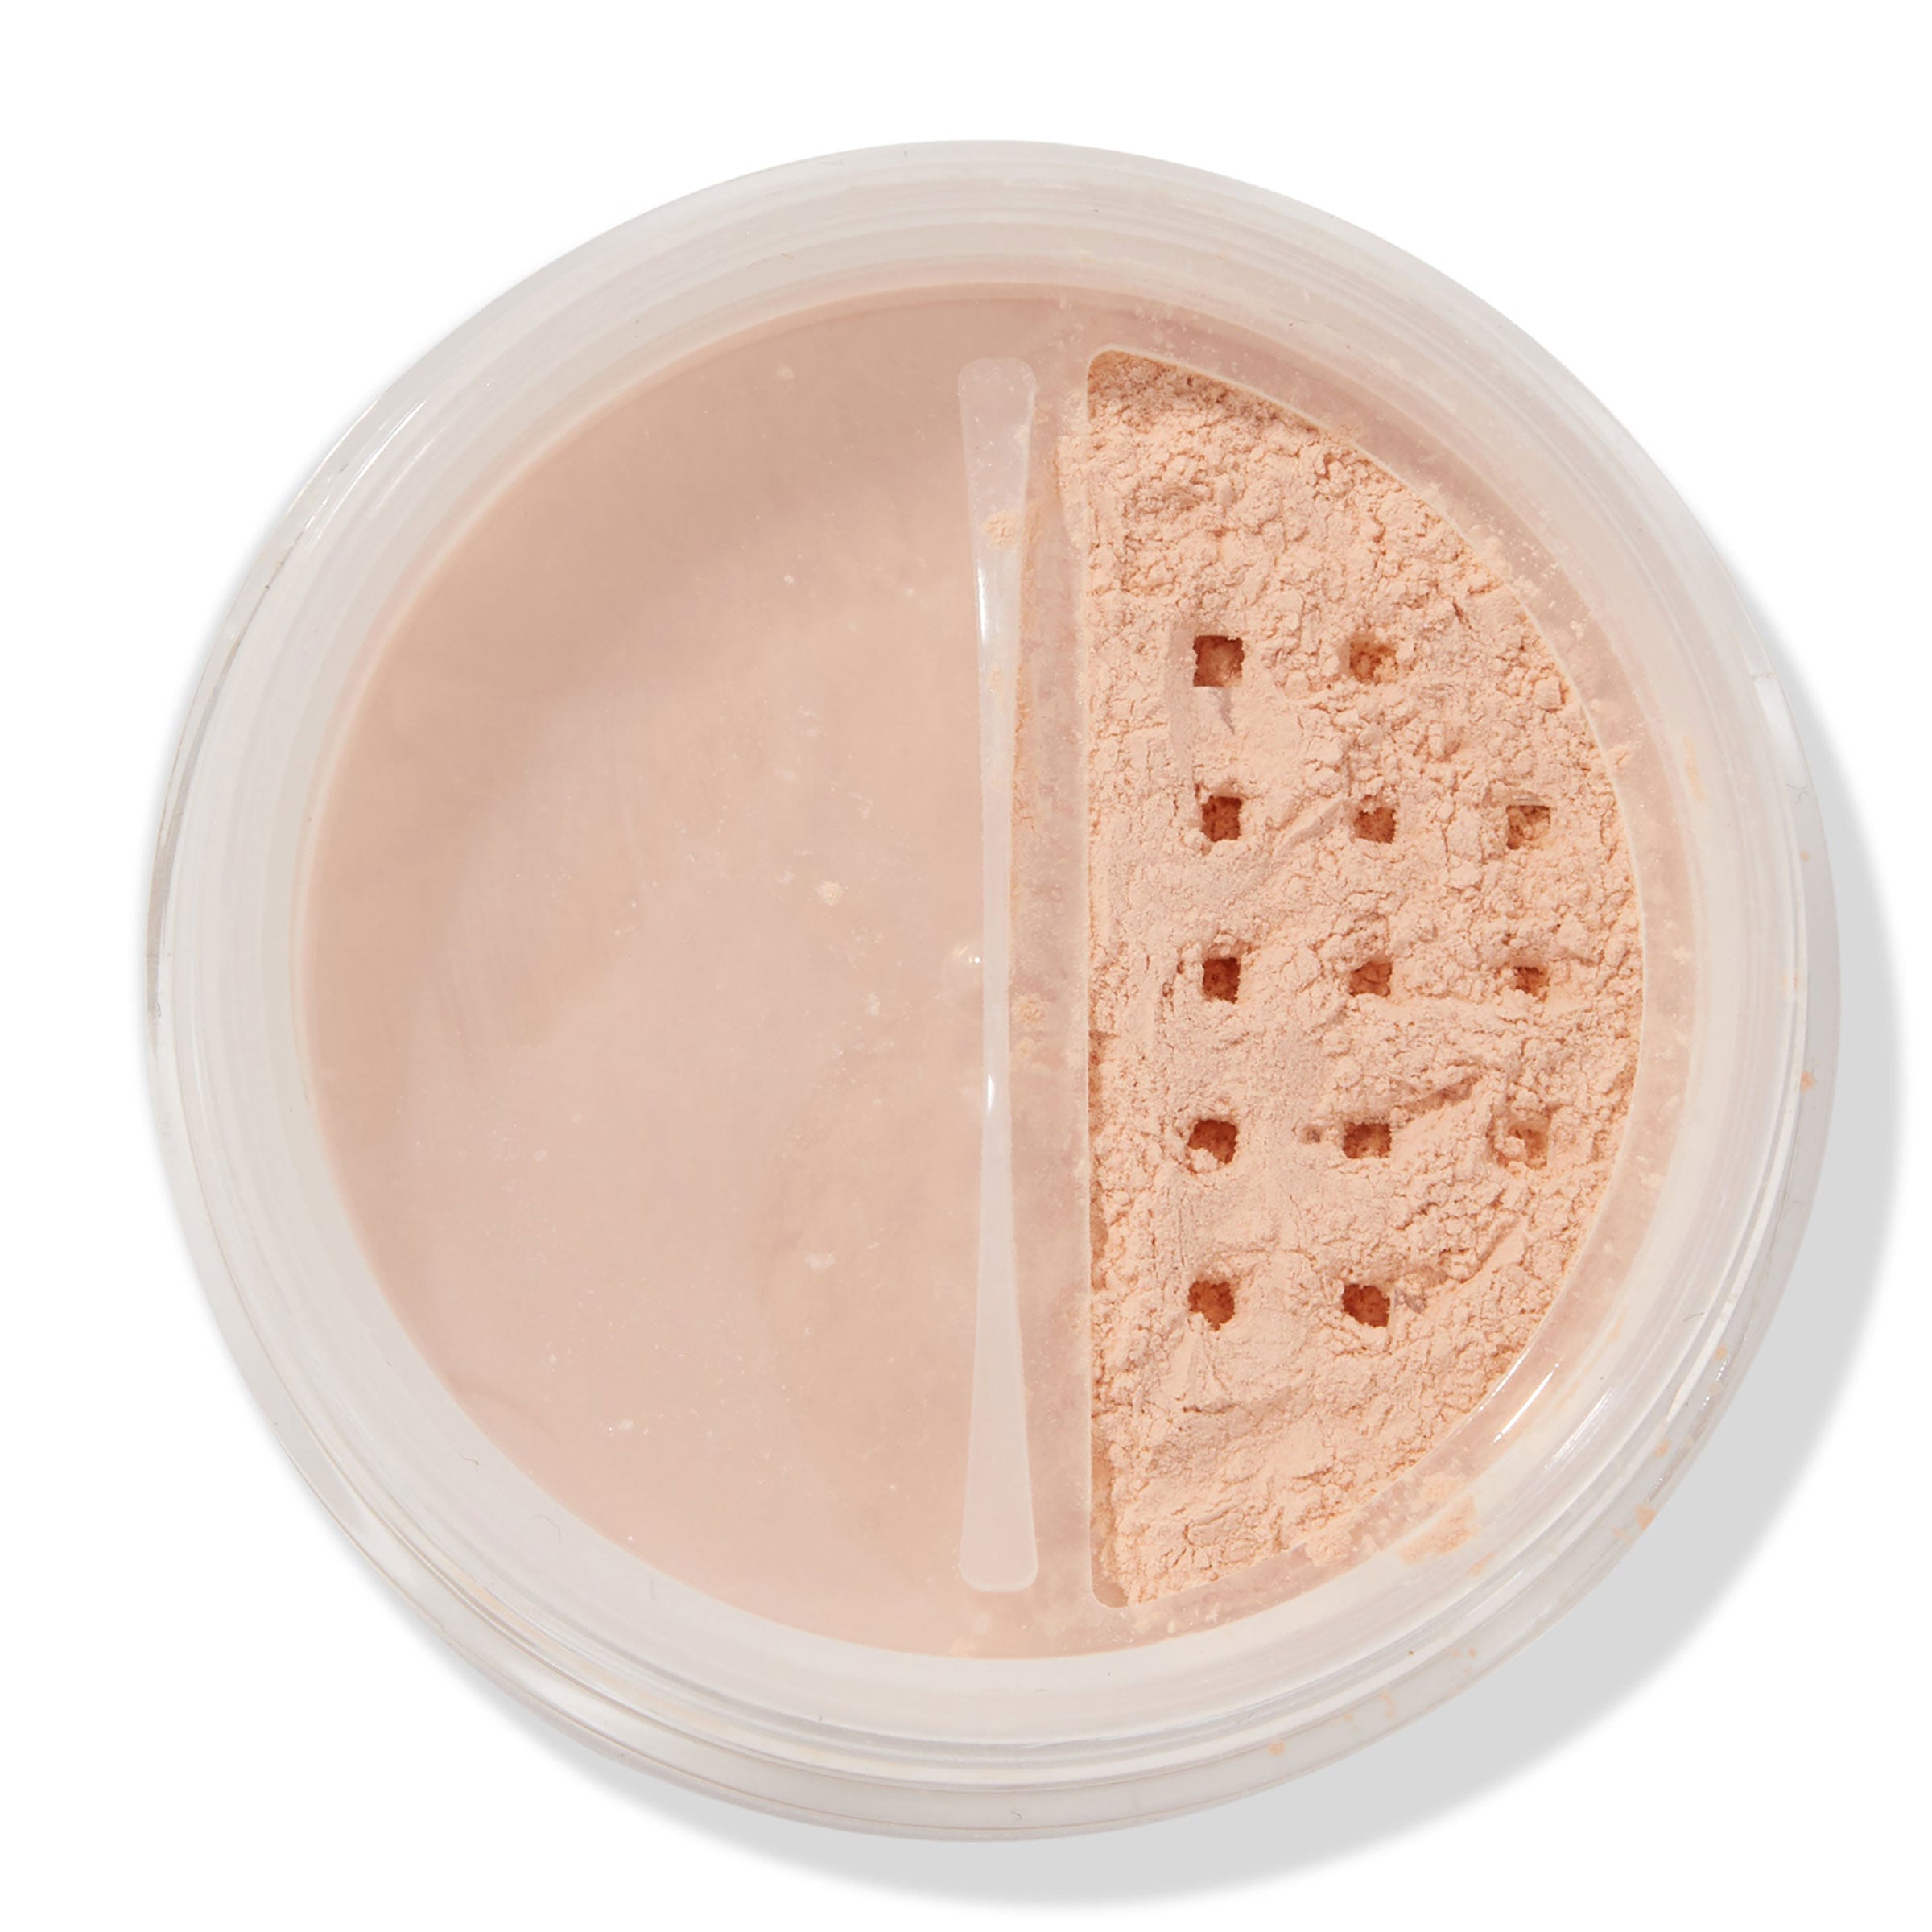 ColourPop Peach No Filter Weightless Loose Setting Powder for all day wear without feeling heavy or looking cakey. Recommended for medium to dark skin tones